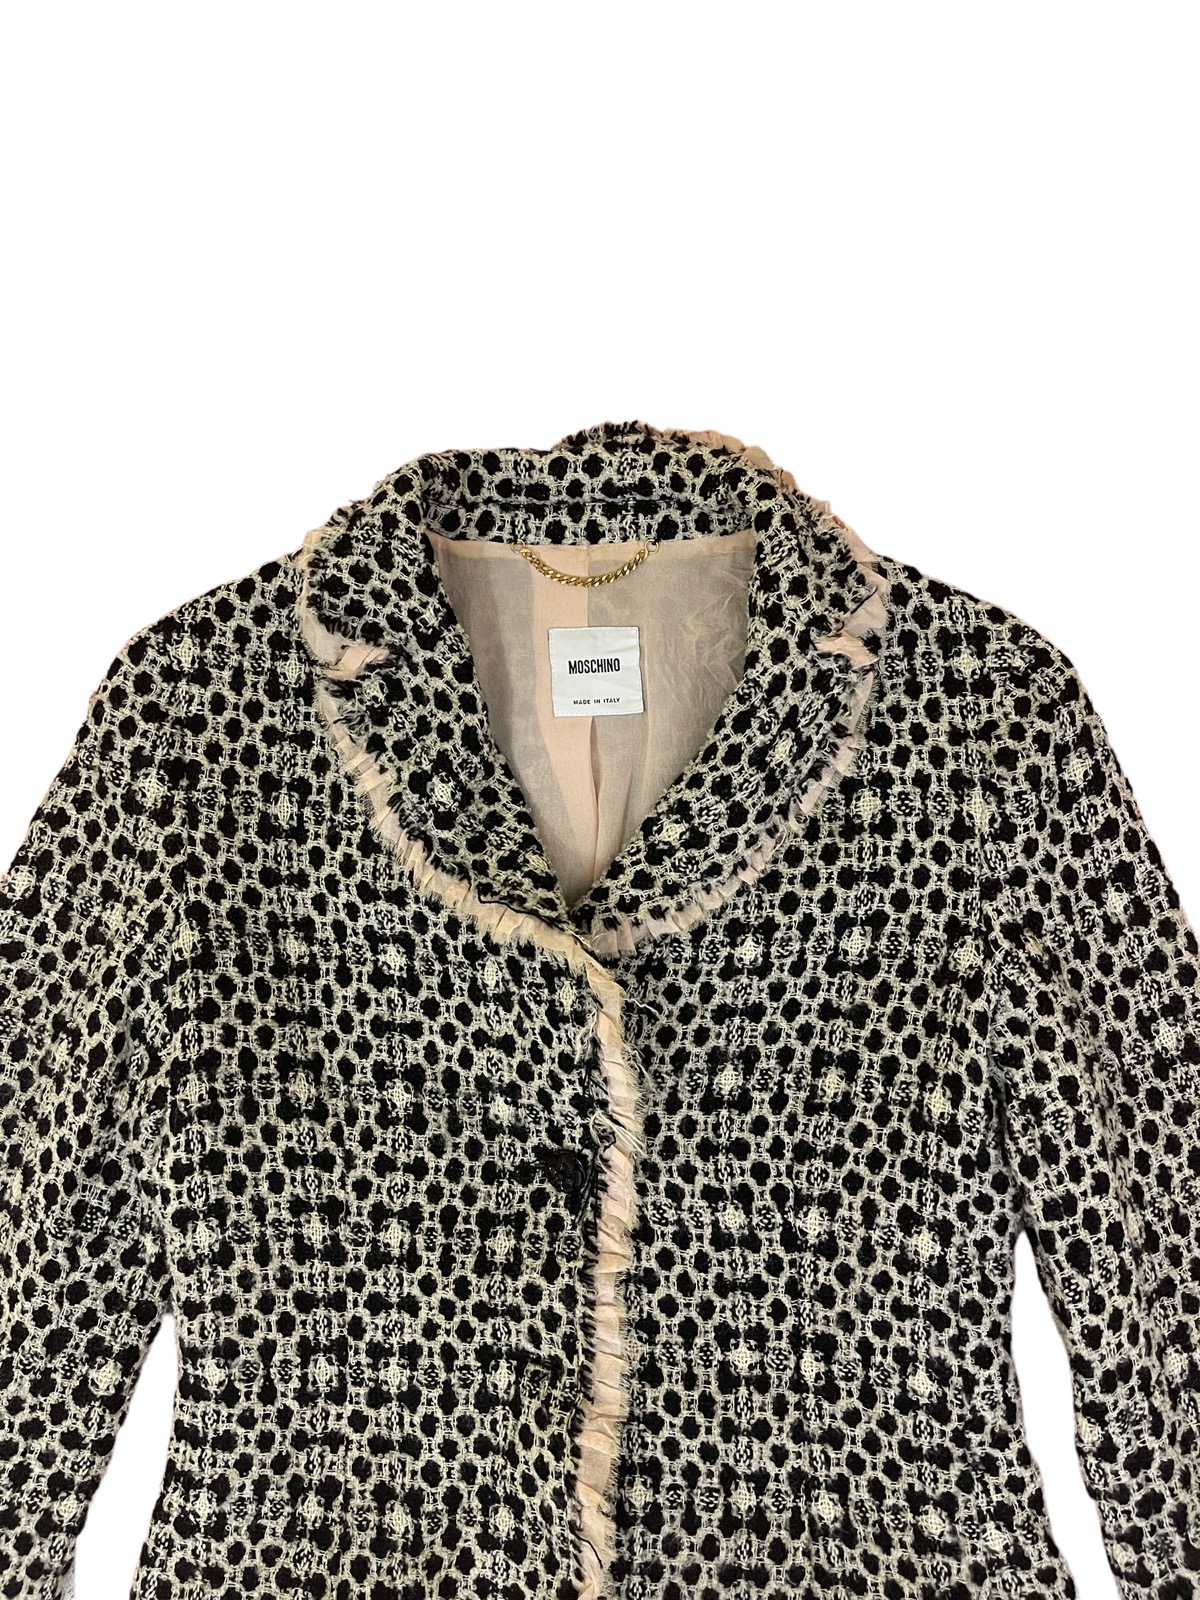 Moschino women jacket made in italy - 6